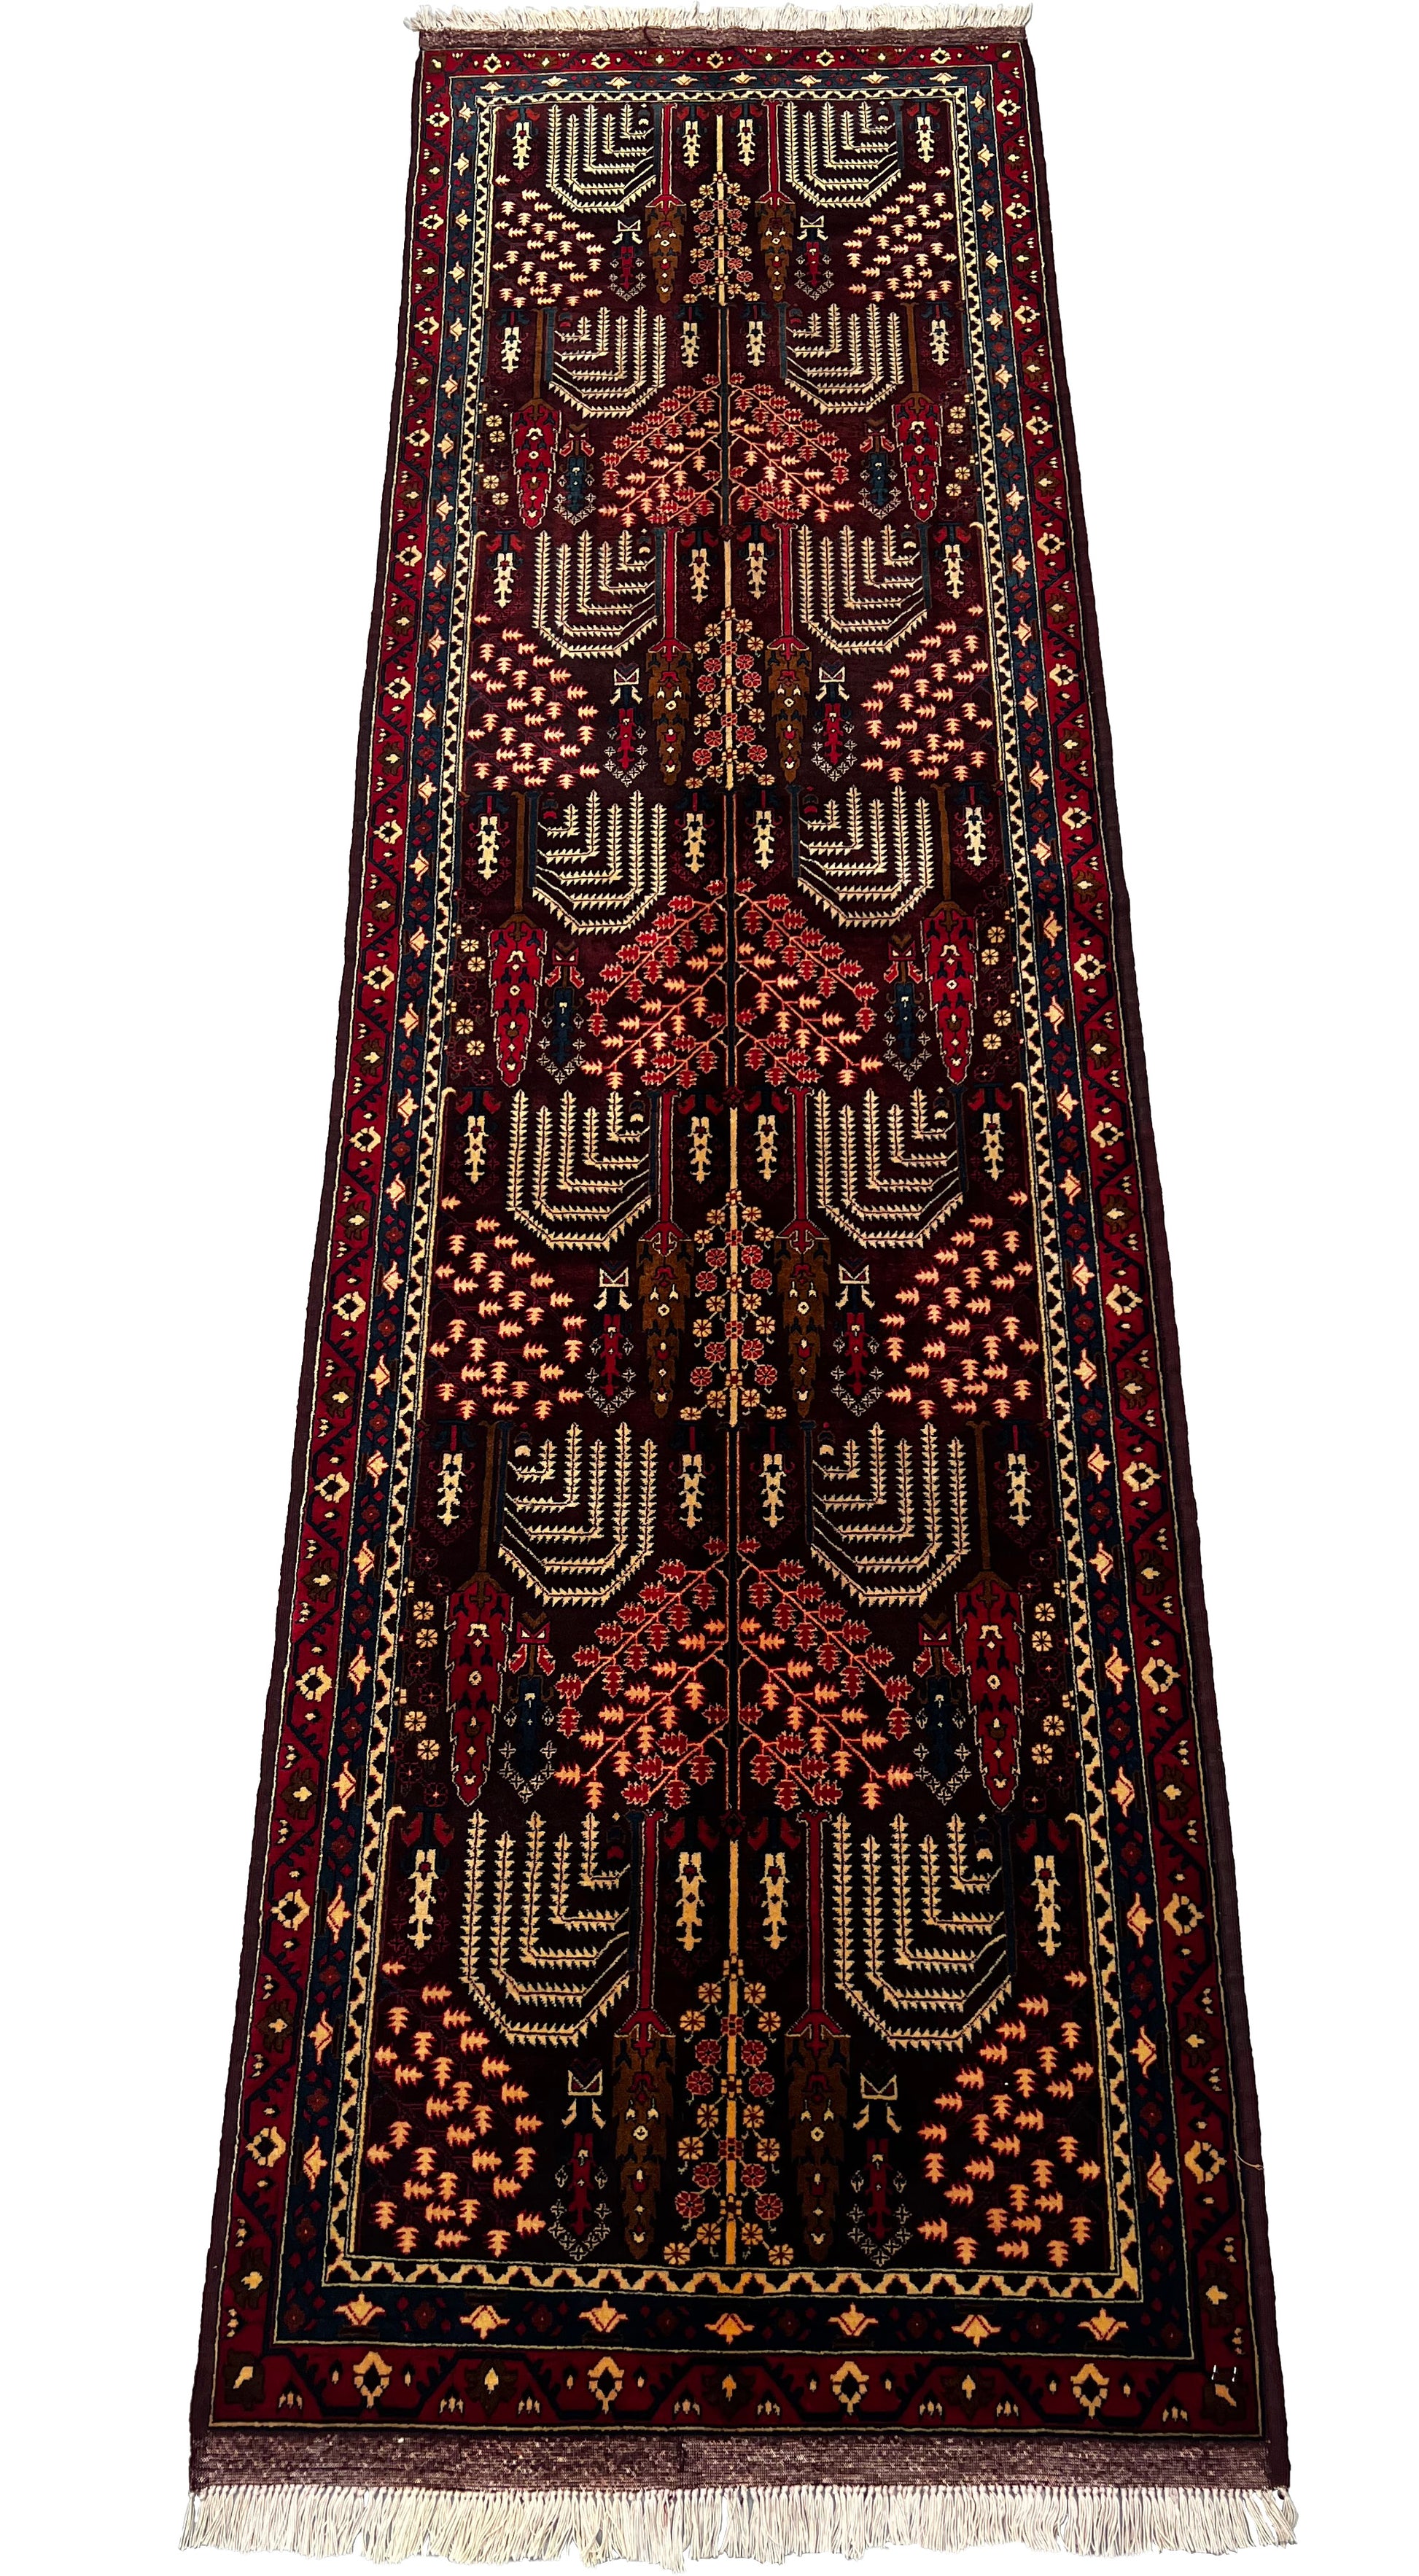 Afghan Hand Knitted/Knotted Hallway Runner Area Rug Size 9.7ft x 2.8t (BL-AND-RUN-R/YO-N) Belgic (Belgique)( Andkhoi) - Kabul Rugs